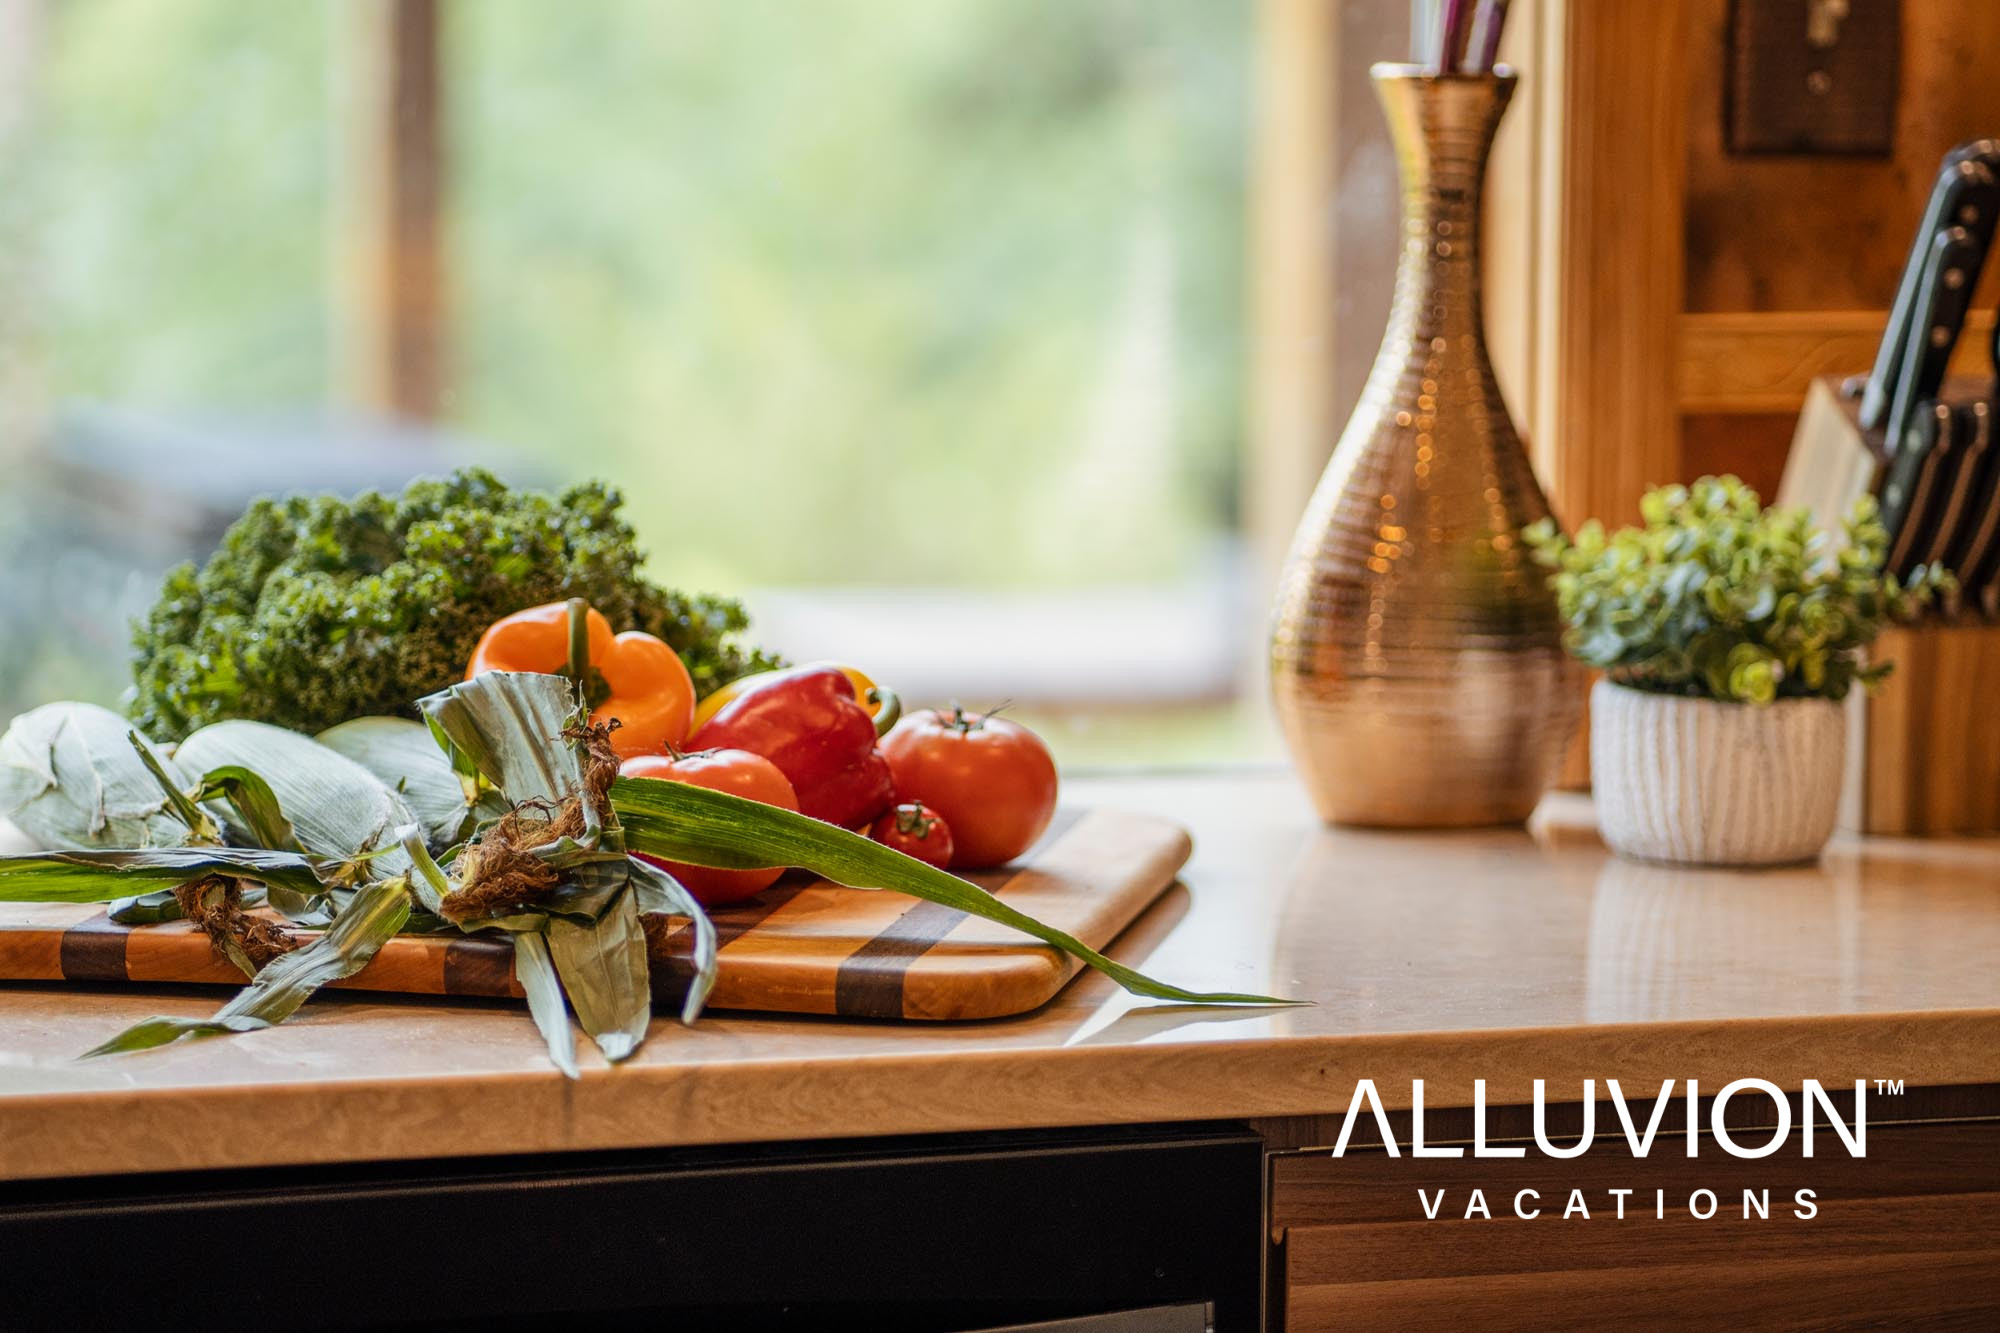 Hudson Valley Vacation Rental Management and Unique Experiences by Alluvion Vacations